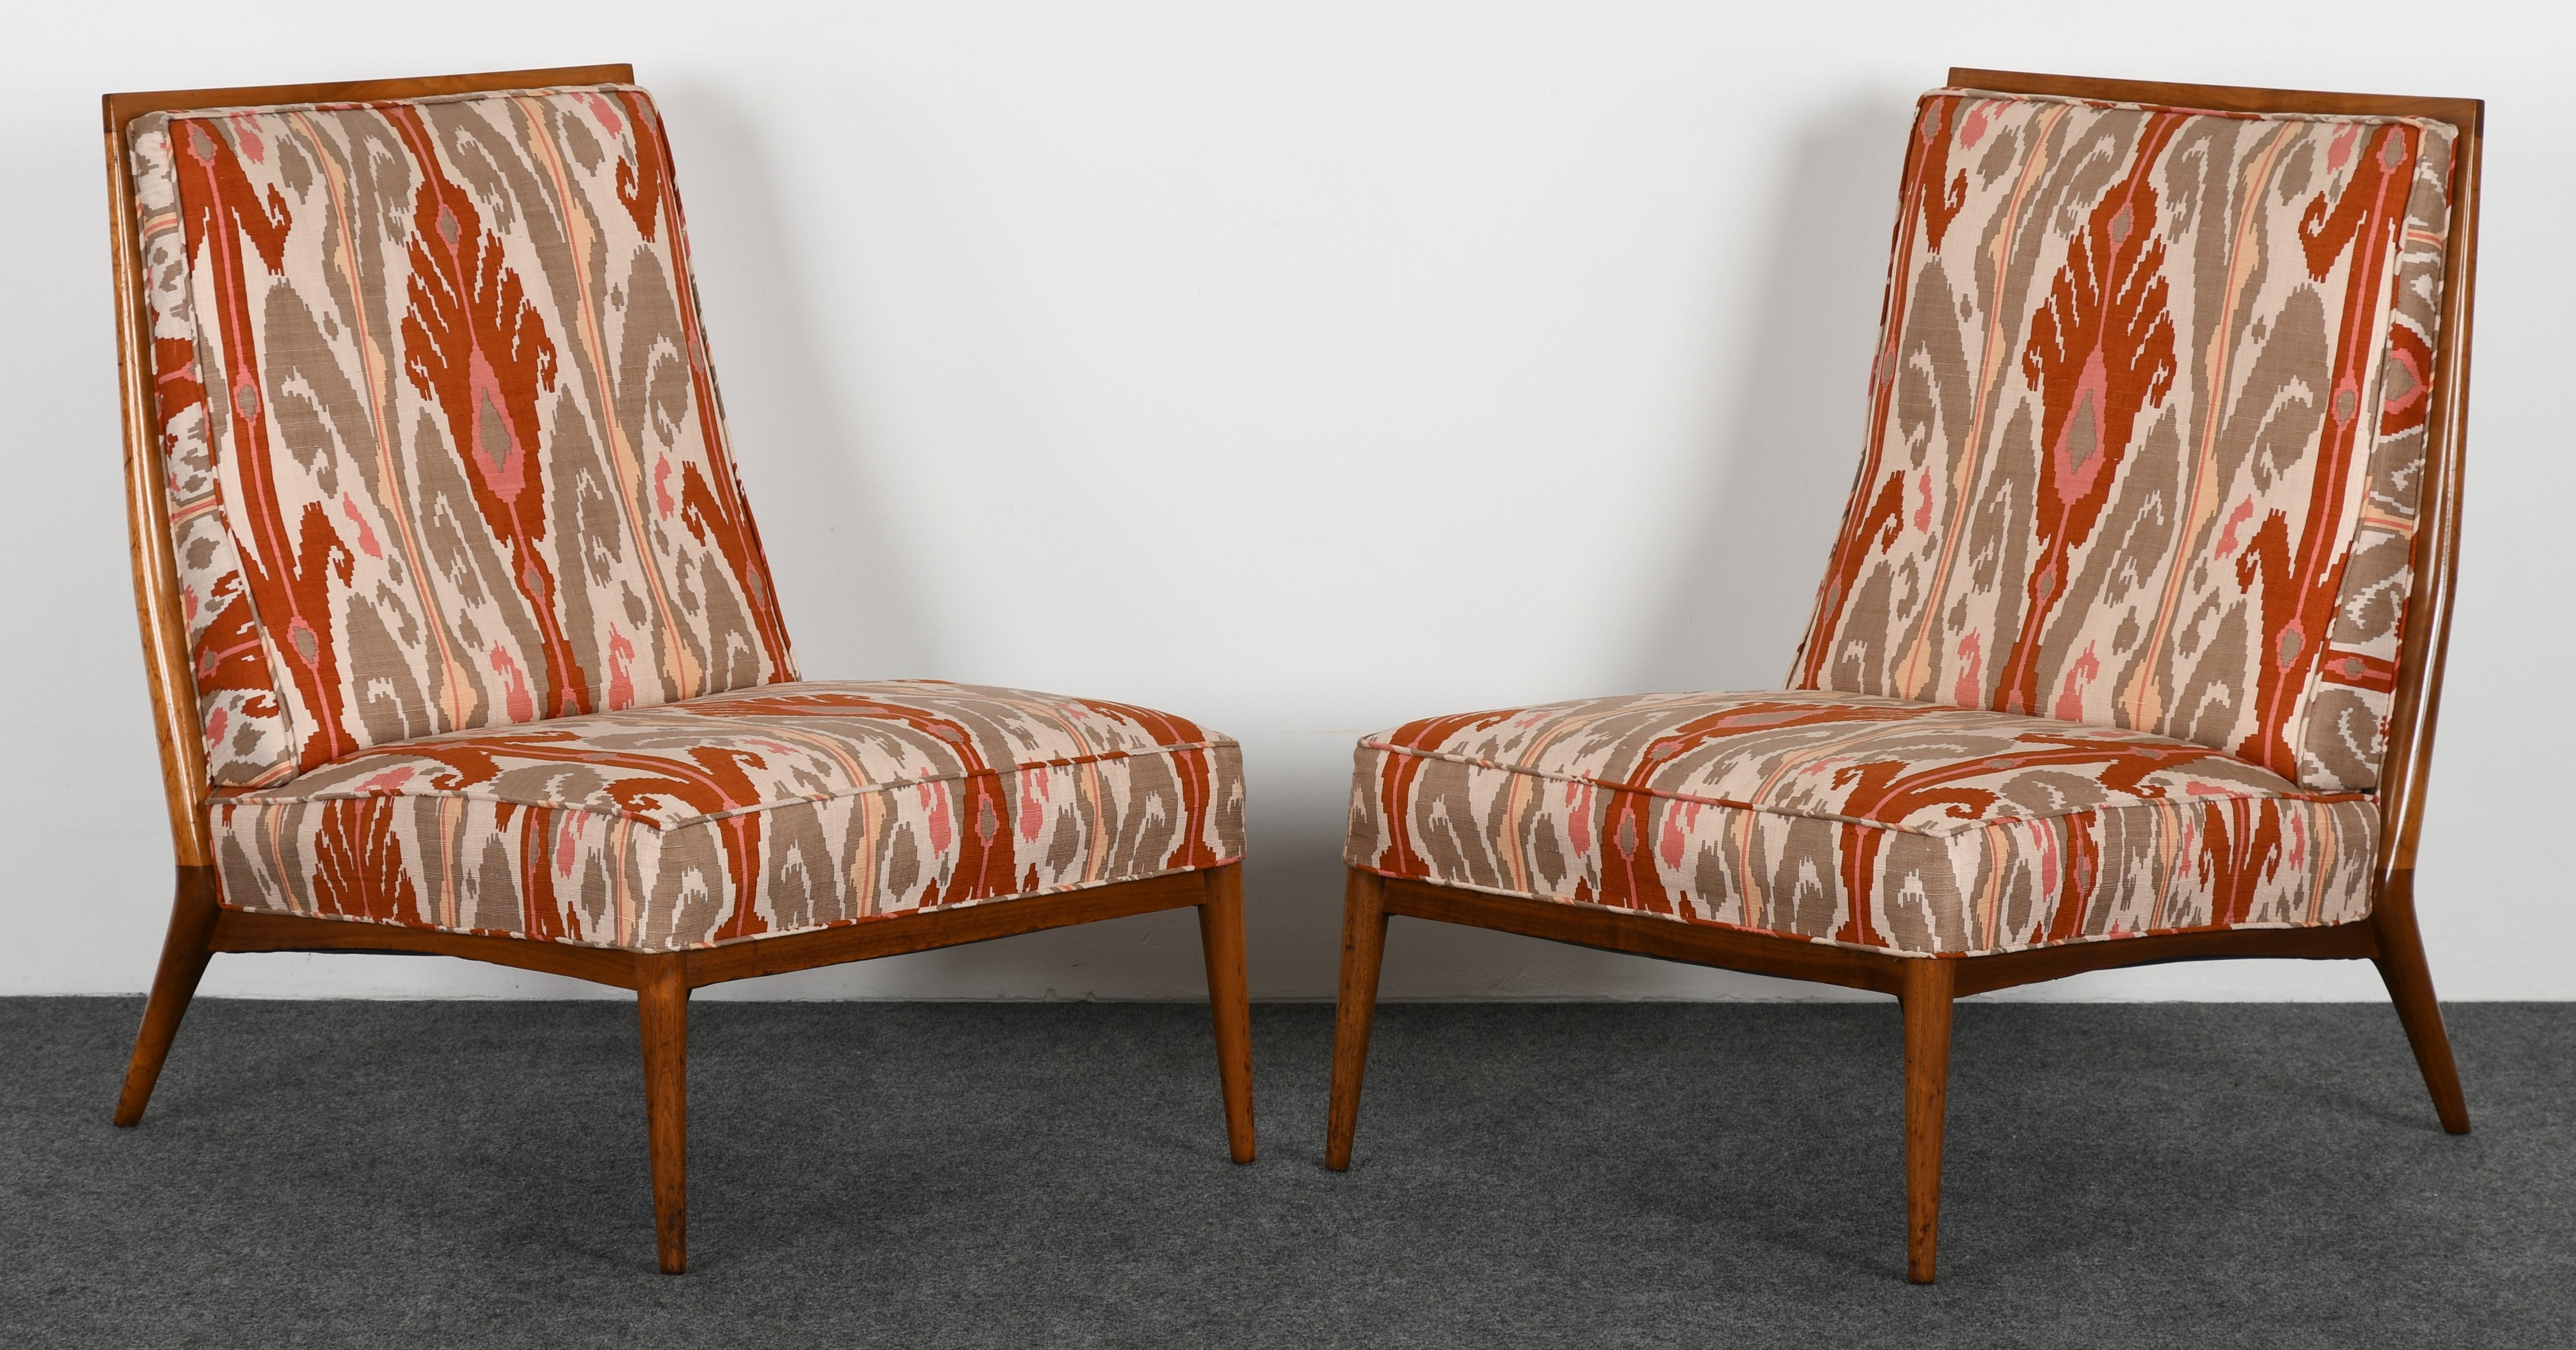 A pair of Paul McCobb walnut slipper chairs, 1960s. The chairs are structurally sound, some scratches and wear to finish, as shown in images. New fabric and refinishing recommended.

Dimensions: 34